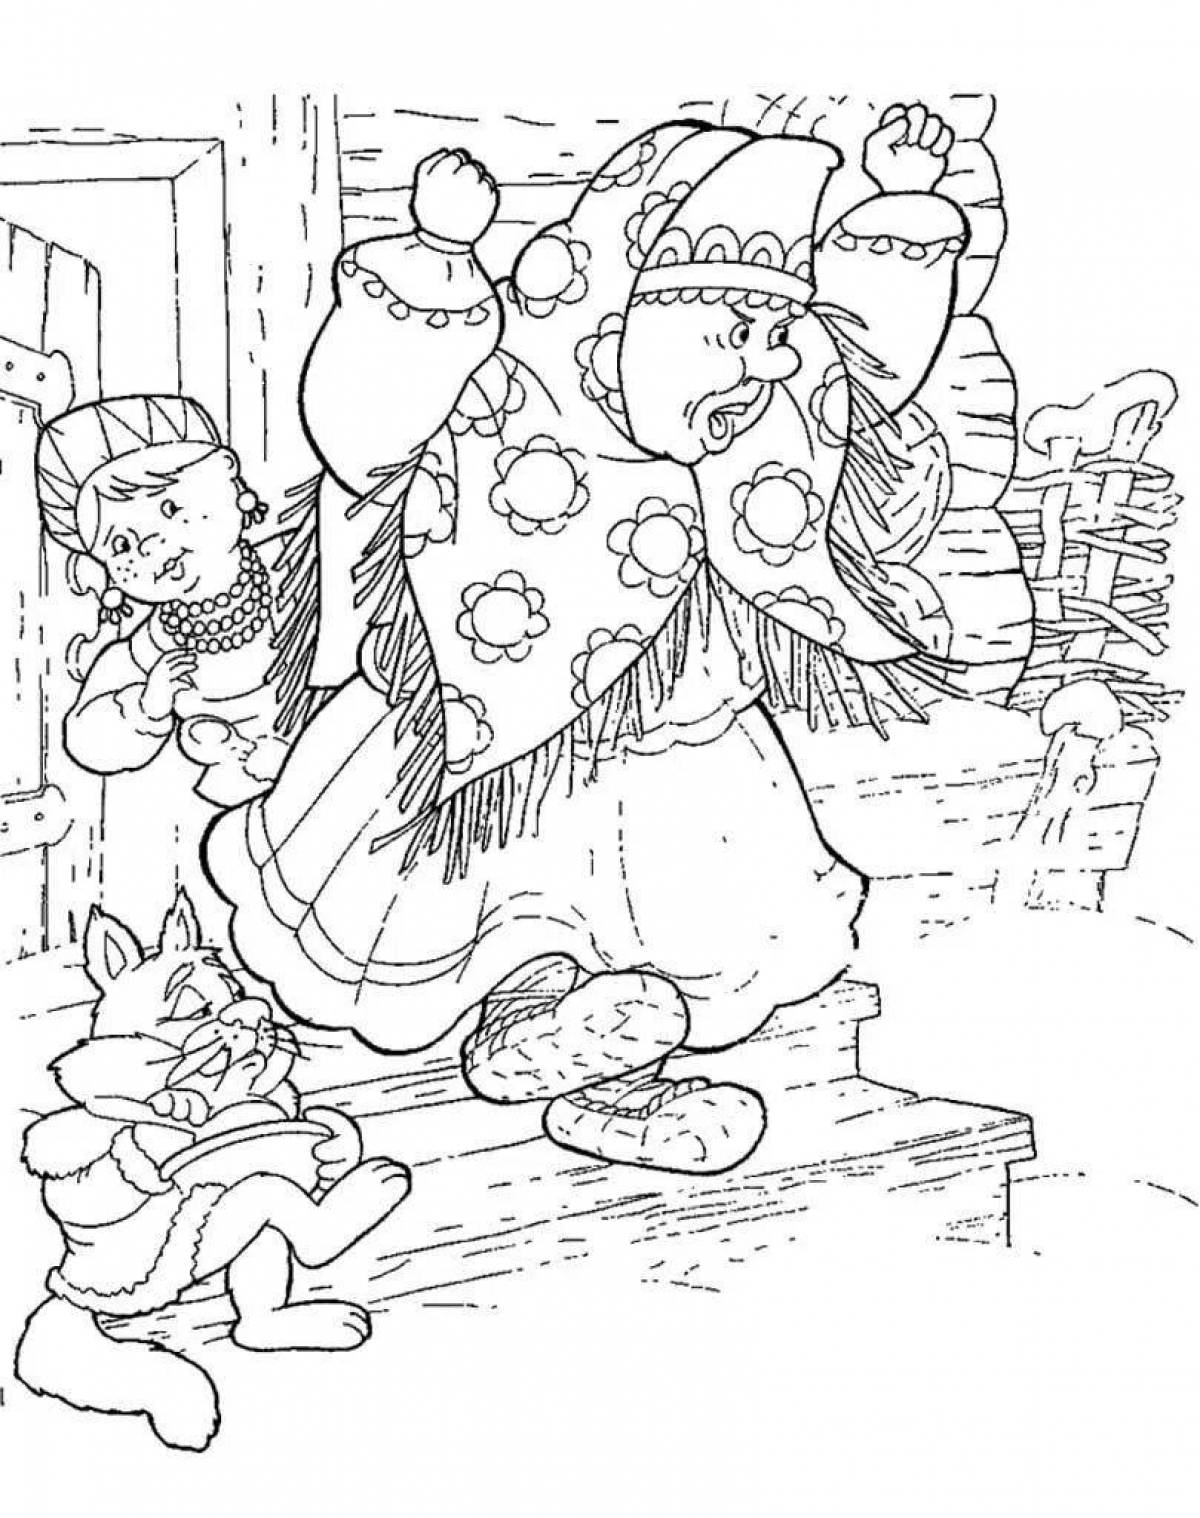 Colorful frost ivanovich coloring page